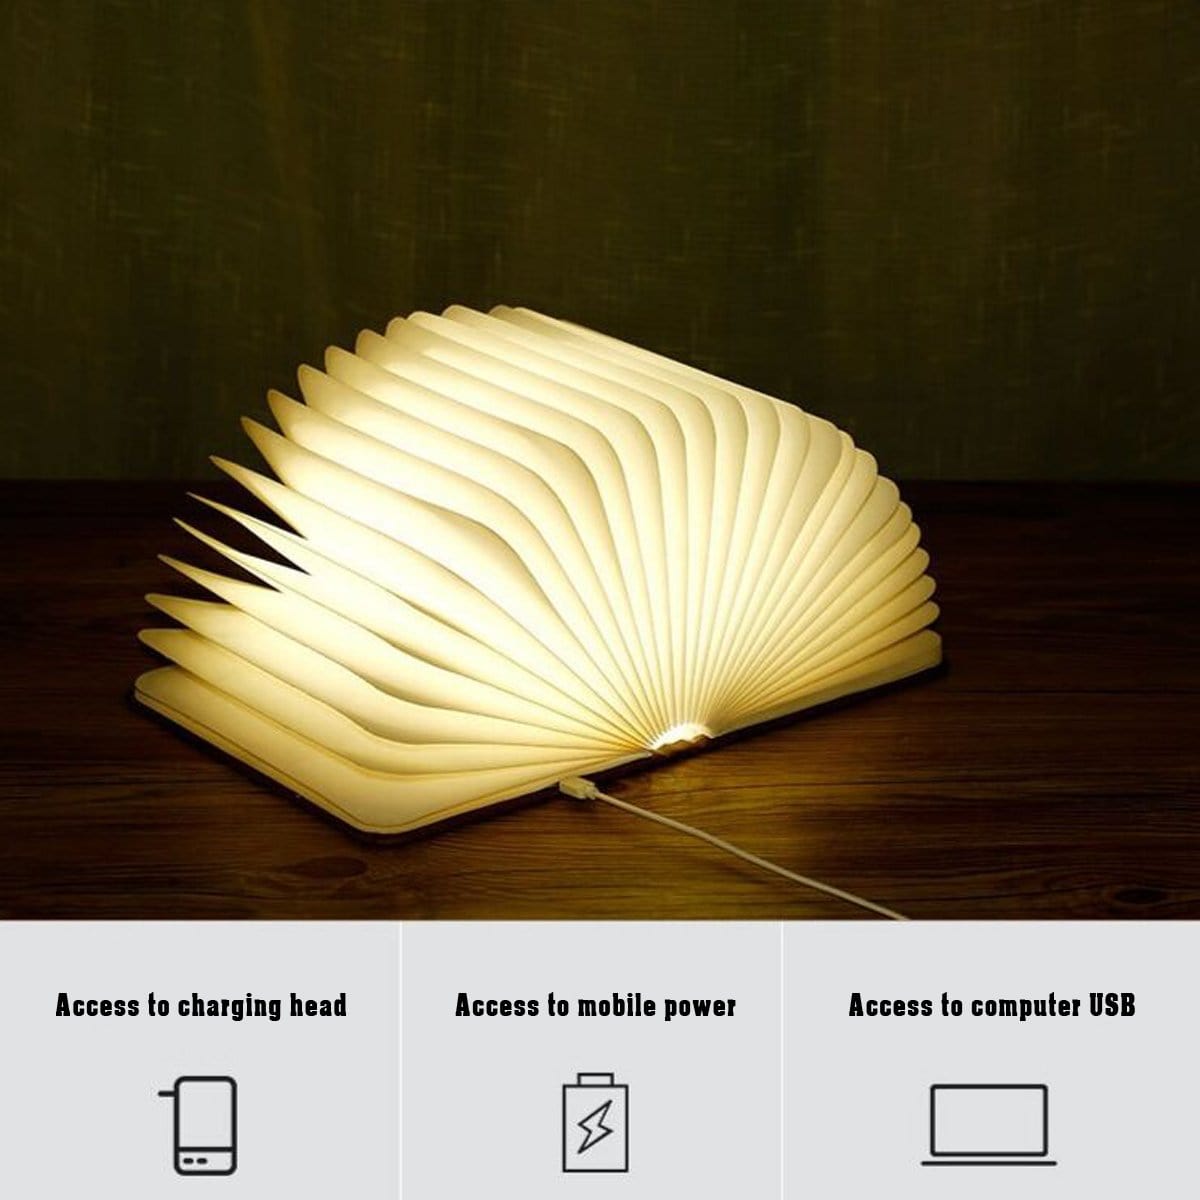 Book Lamp Dad To Daughter - I Can Promise To Love You LED Folding Book Light GiveMe-Gifts